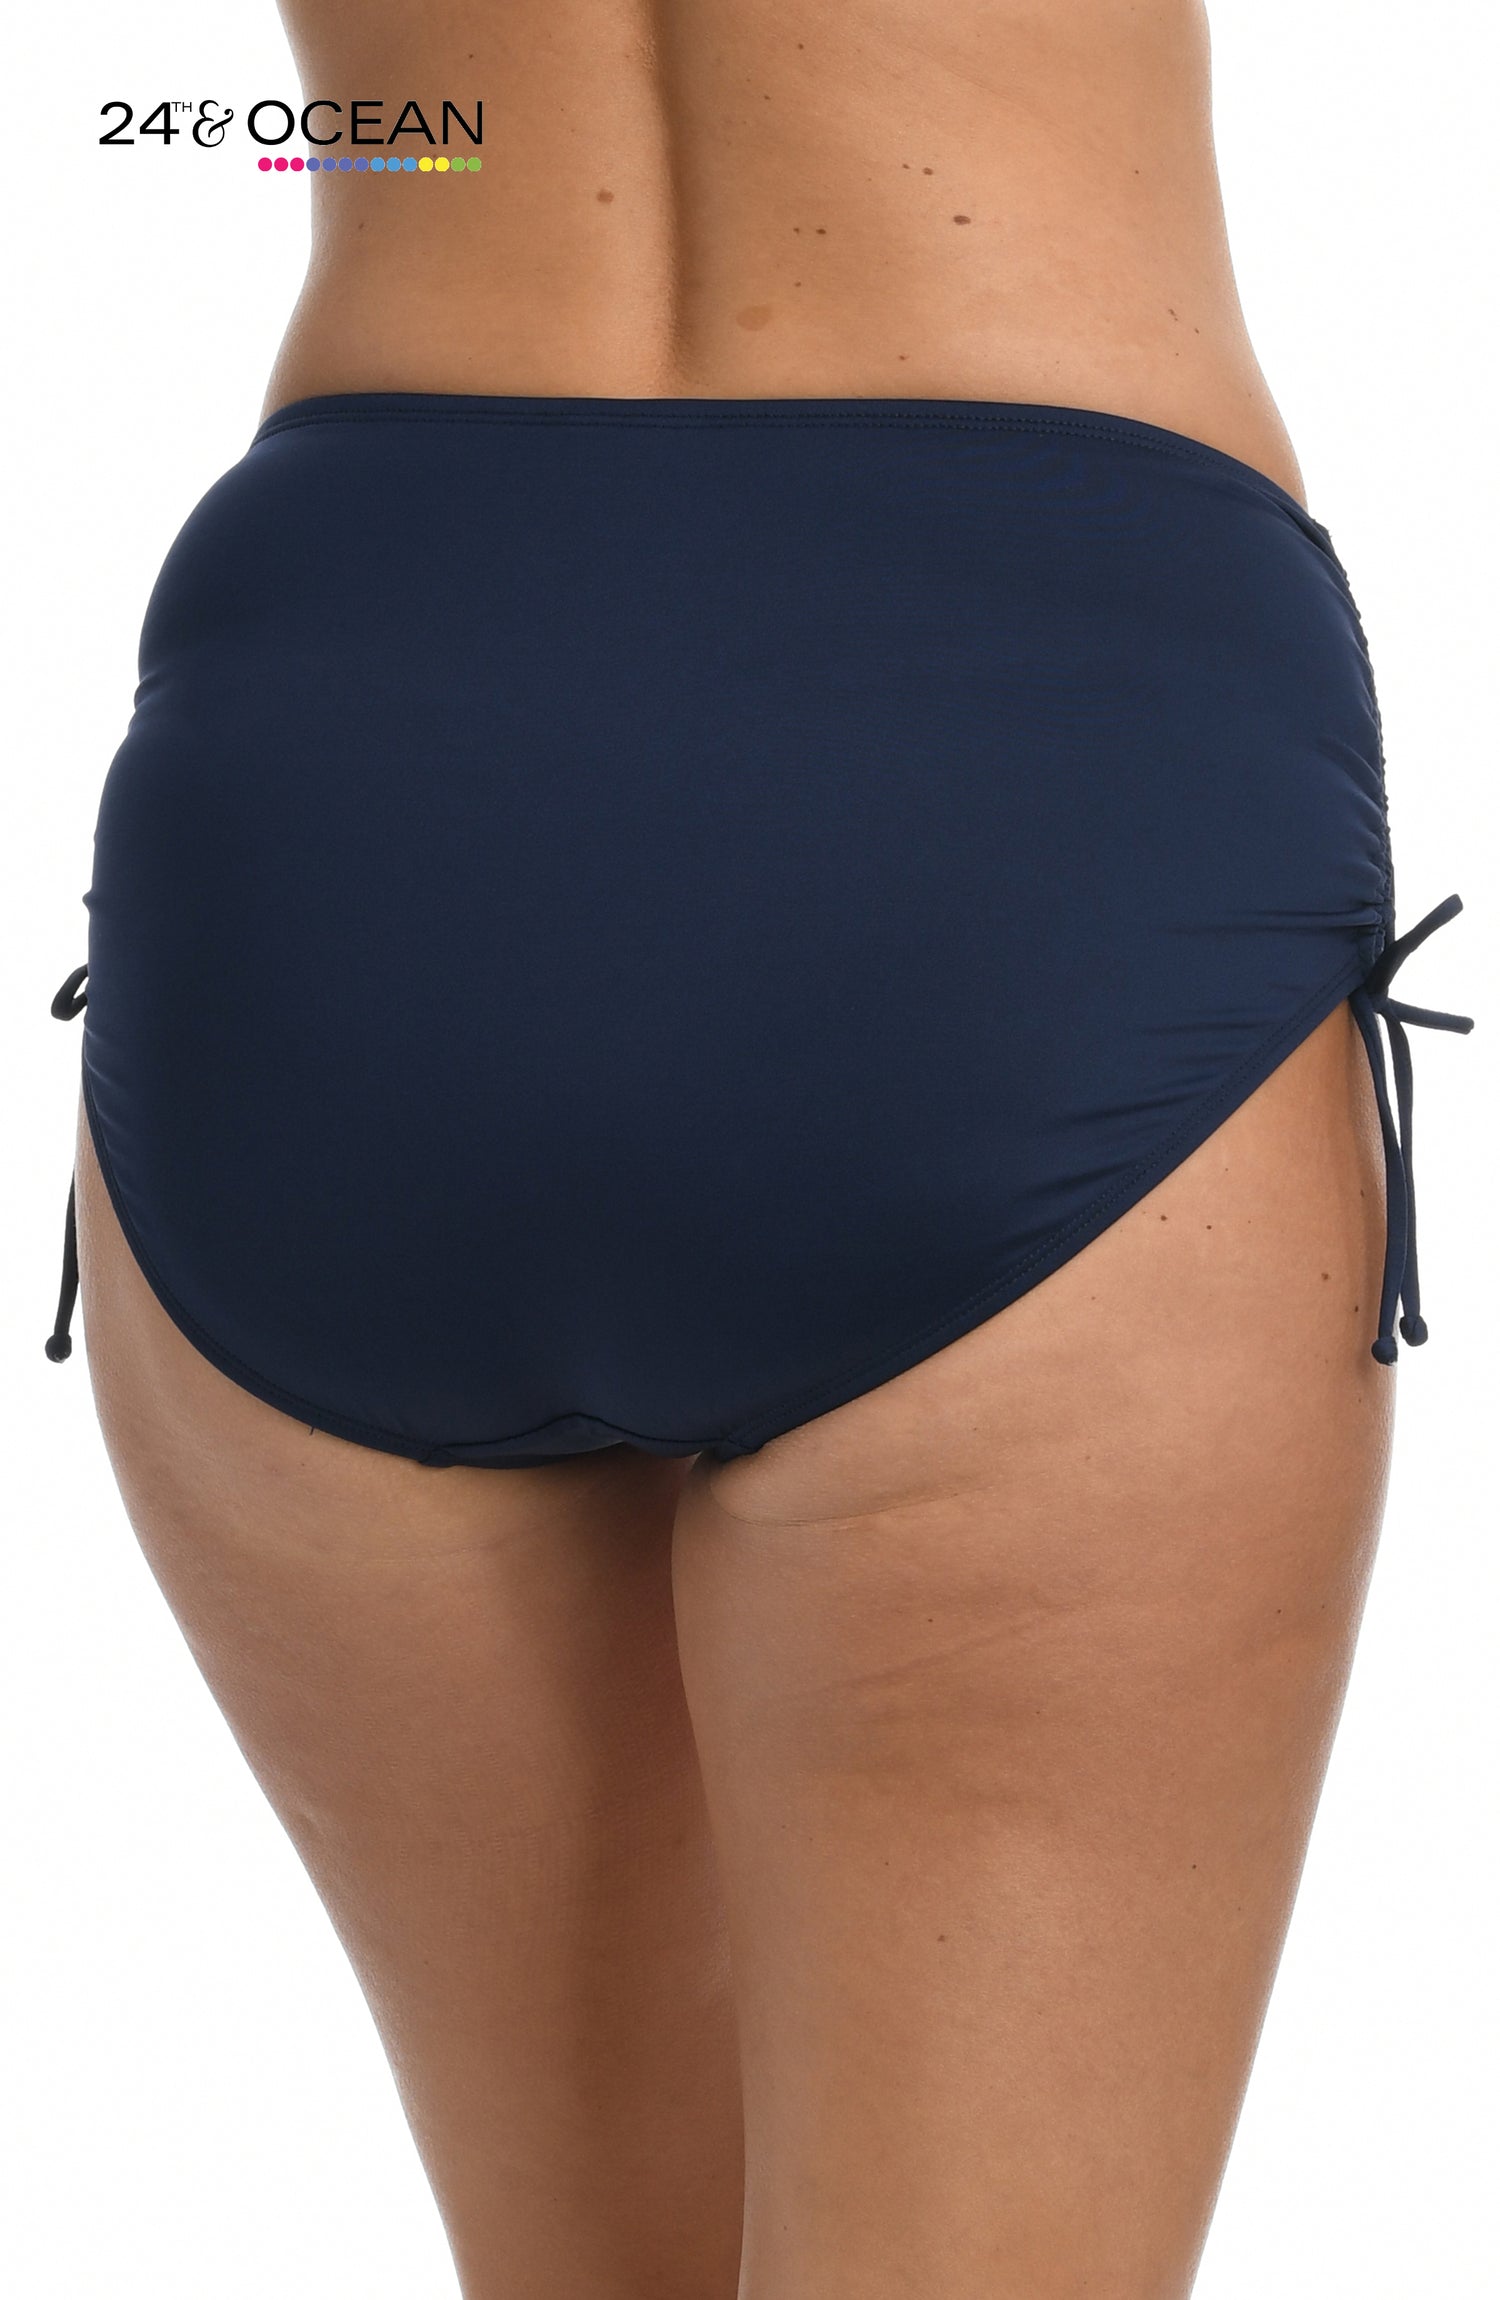 Model is wearing a solid midnight blue colored mid waist adjustable hipster bikini bottom from our 24th & Ocean brand.